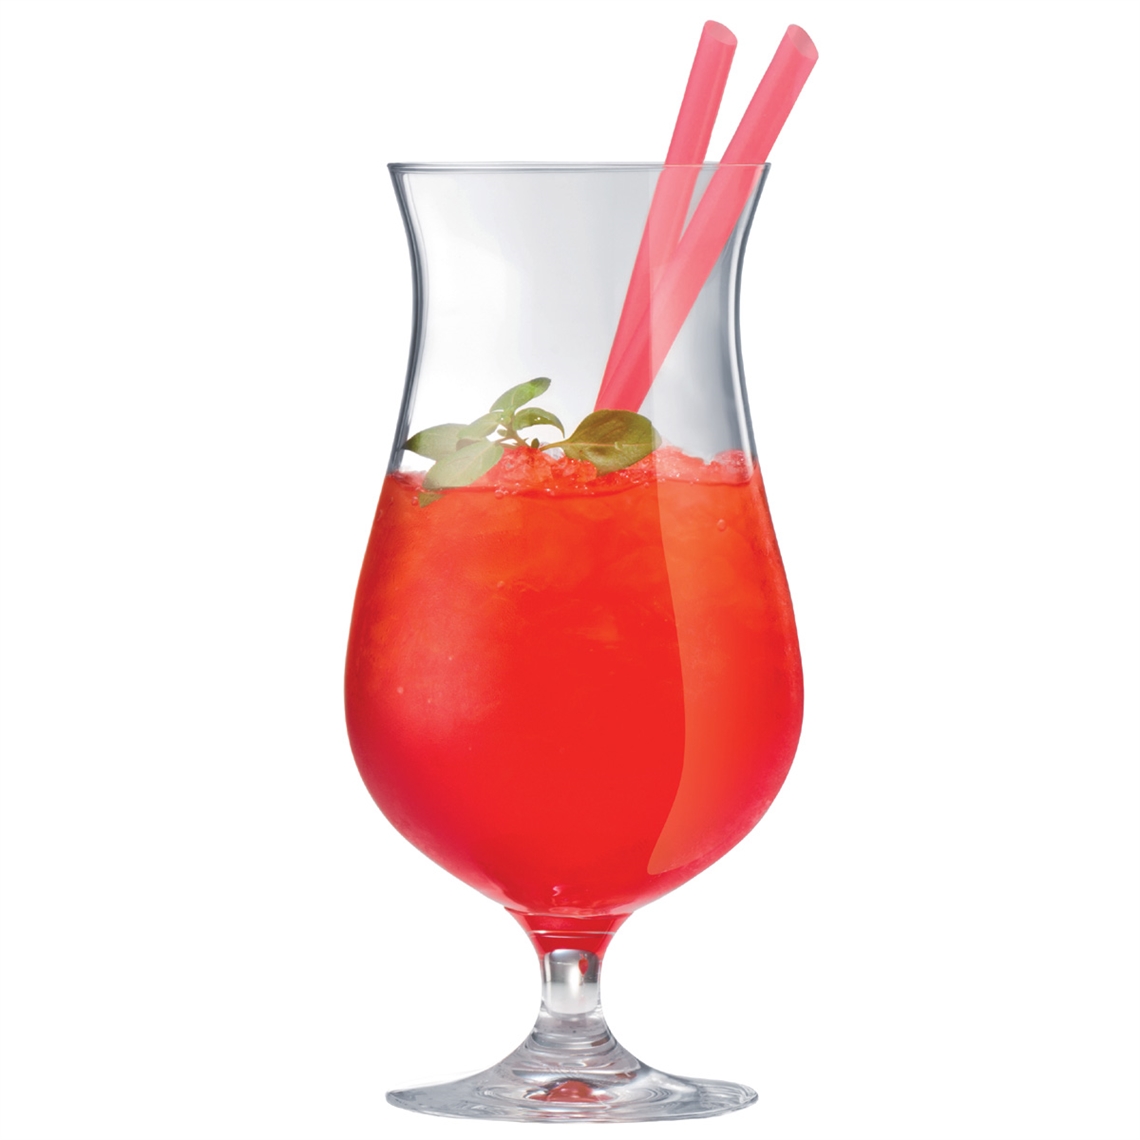 View more water glasses / tumblers from our Cocktail Glasses range